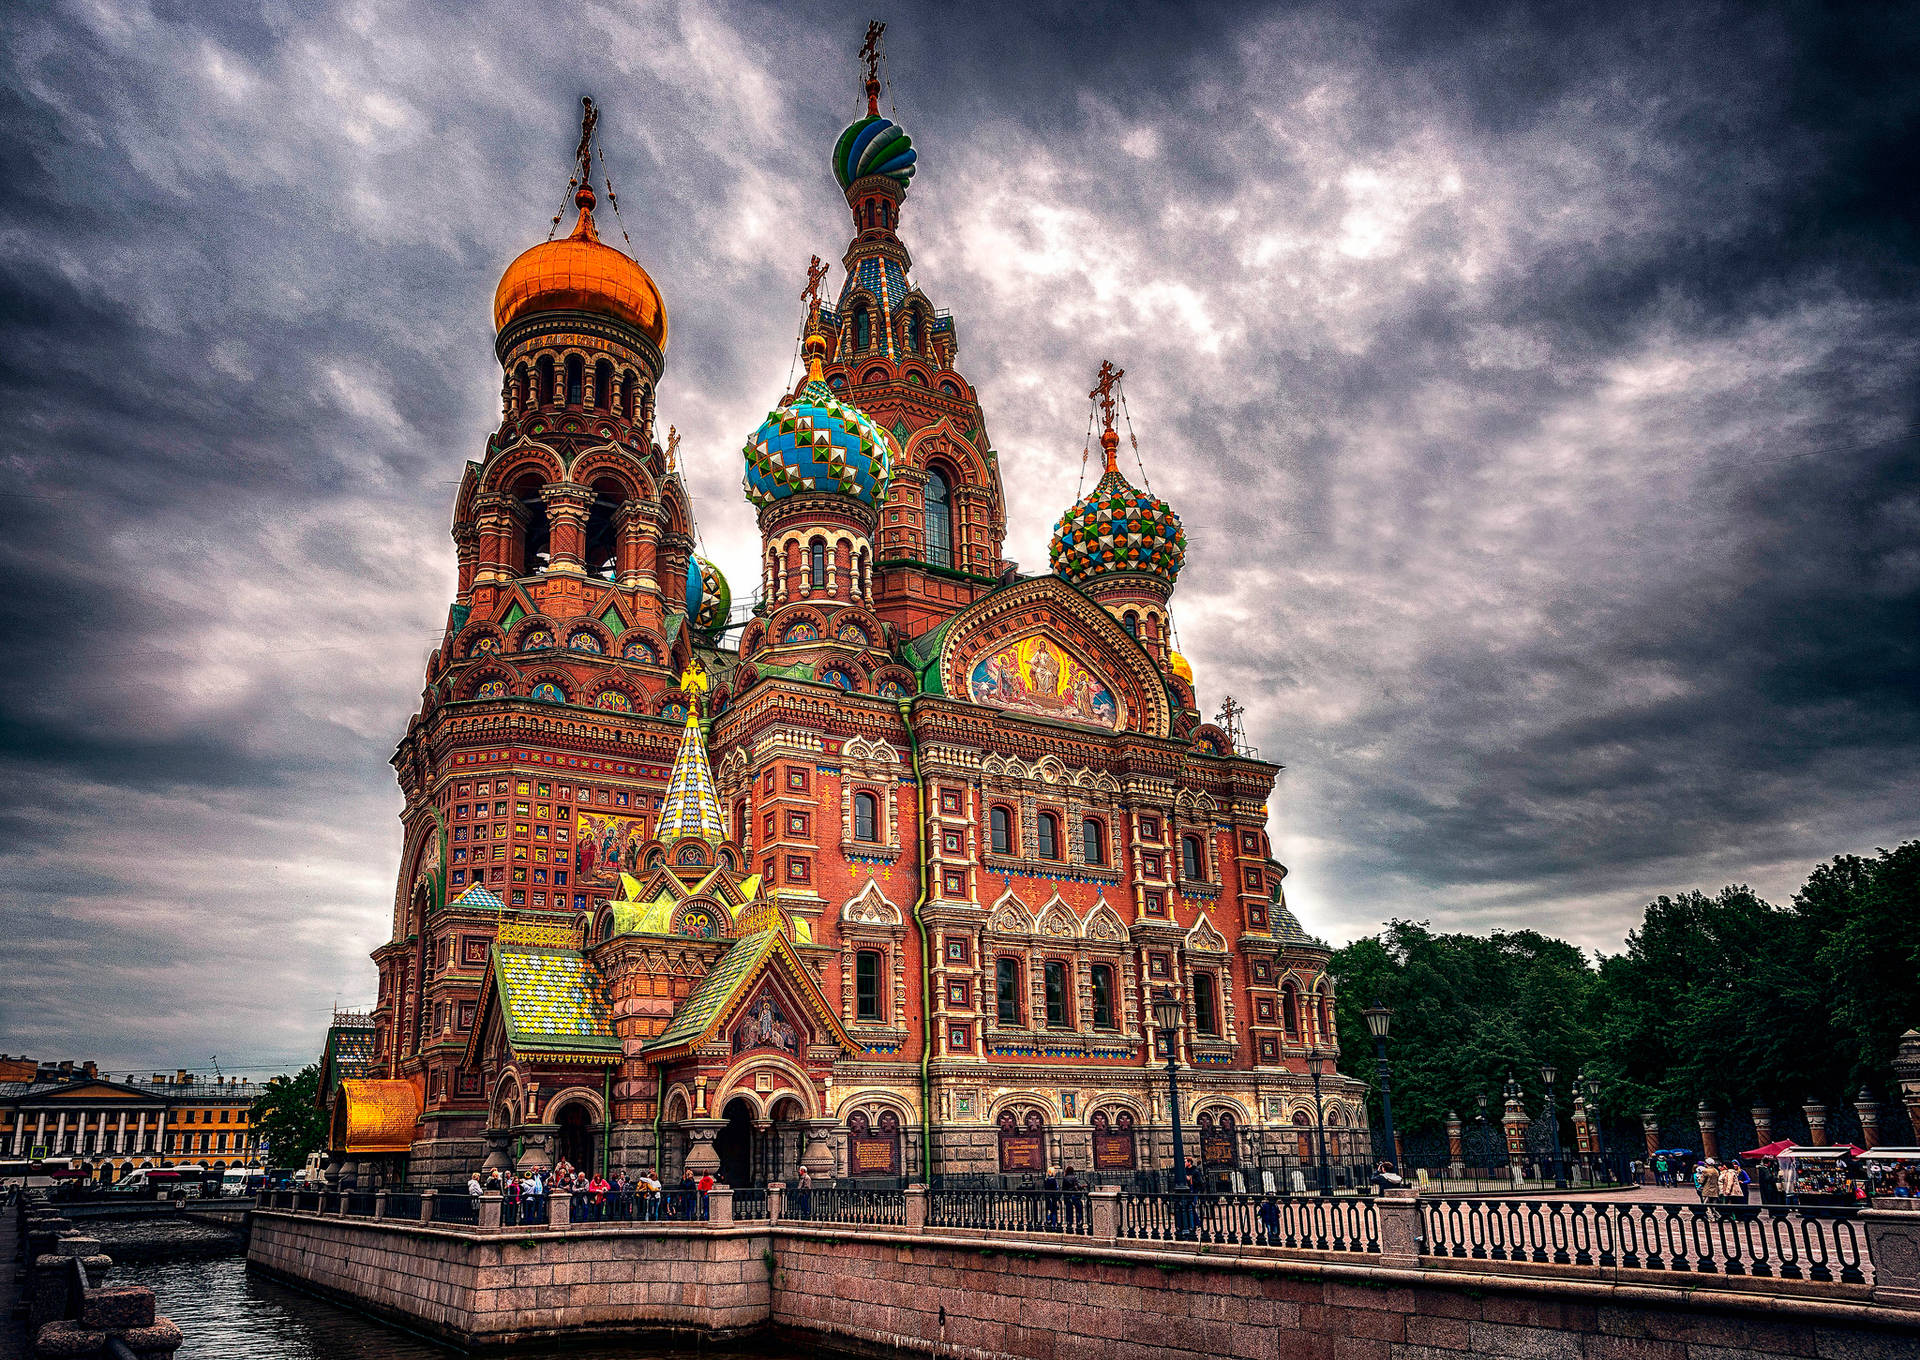 Majestic View Of The Savior On Spilled Blood, A Monumental Symbol Of Russian Heritage. Background